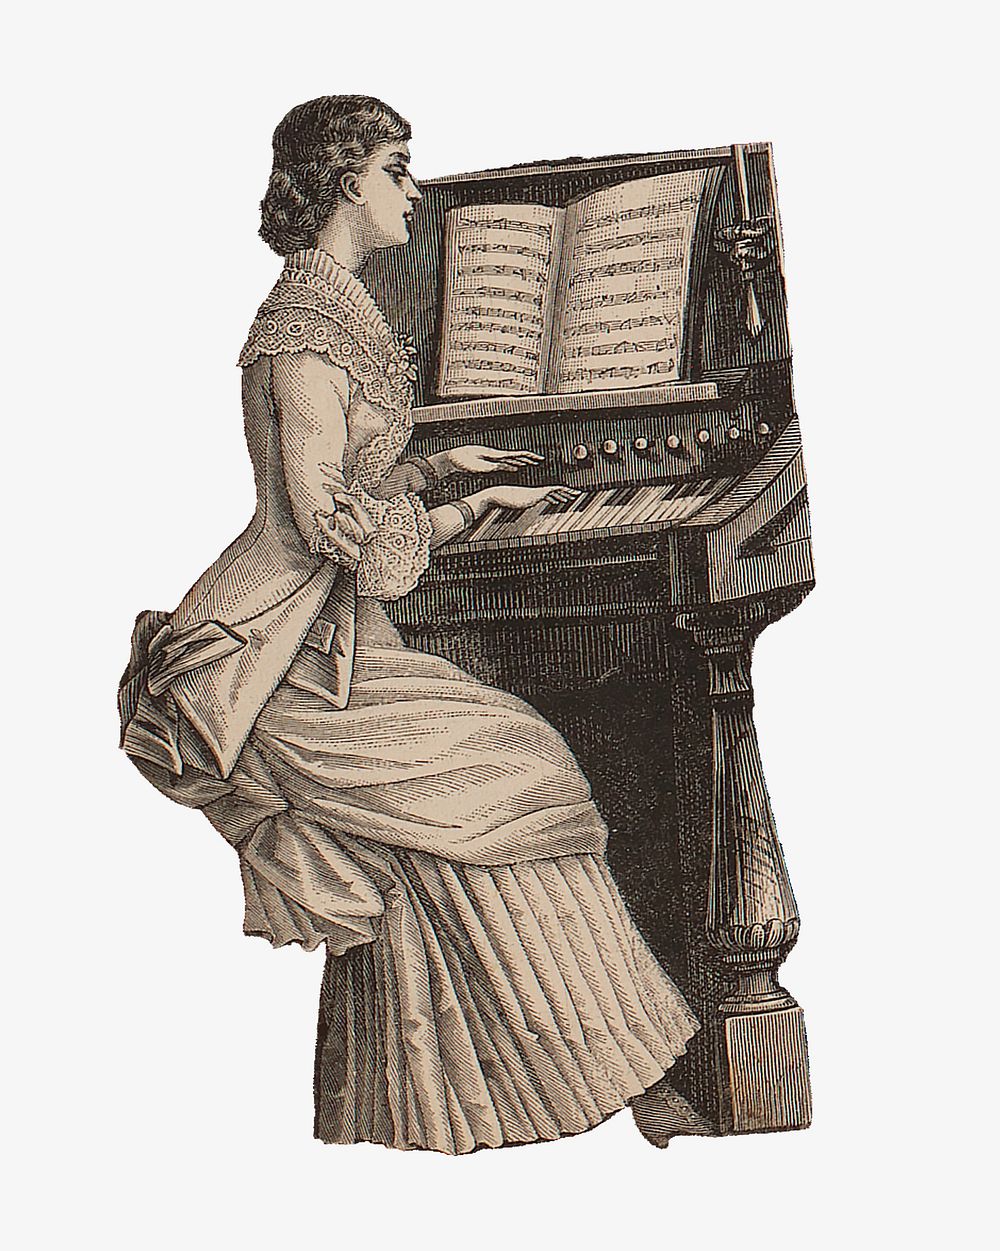 Woman playing piano, vintage collage element. Remastered by rawpixel.